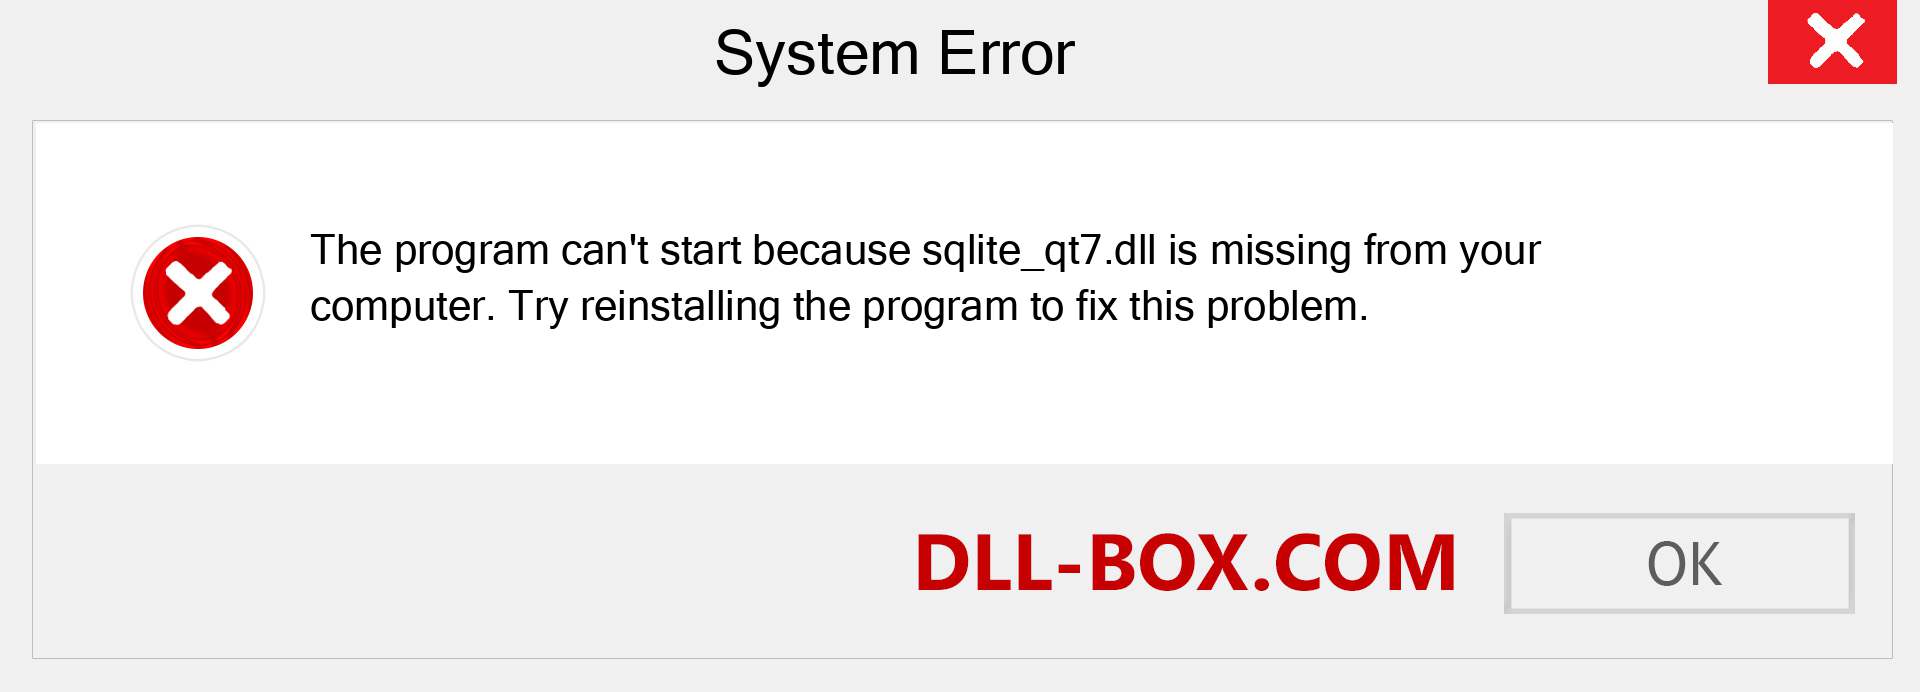  sqlite_qt7.dll file is missing?. Download for Windows 7, 8, 10 - Fix  sqlite_qt7 dll Missing Error on Windows, photos, images